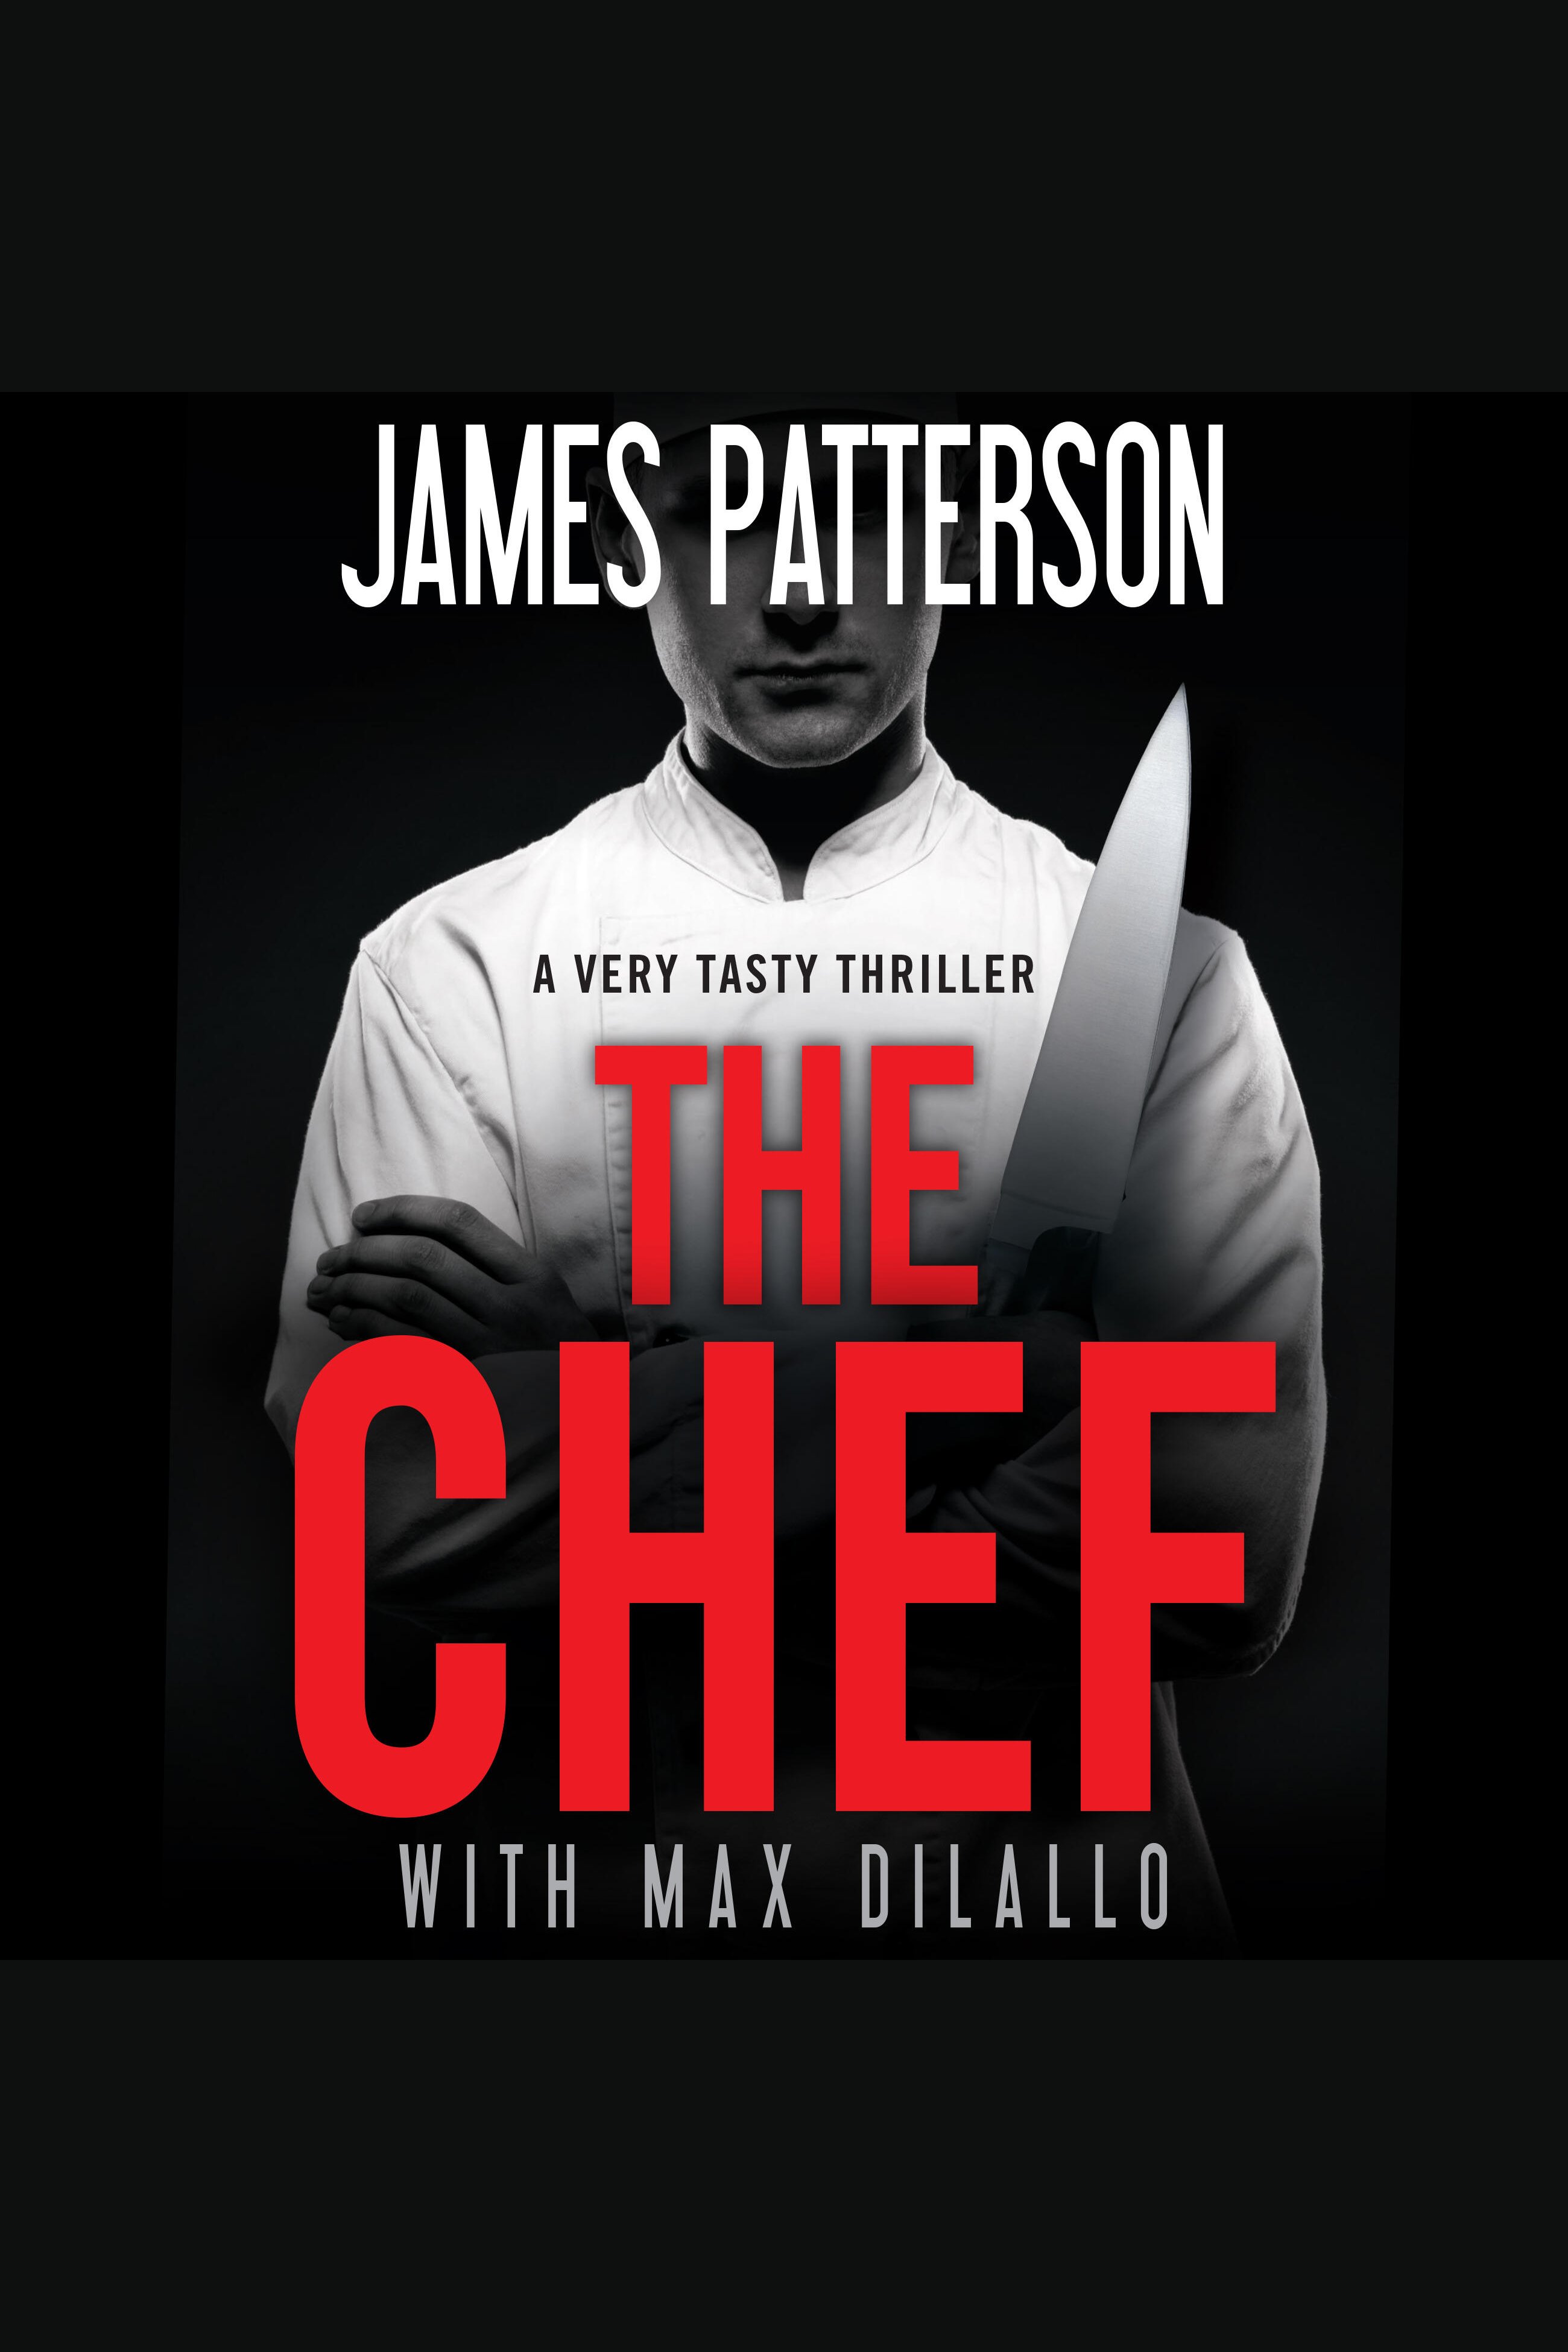 The chef cover image